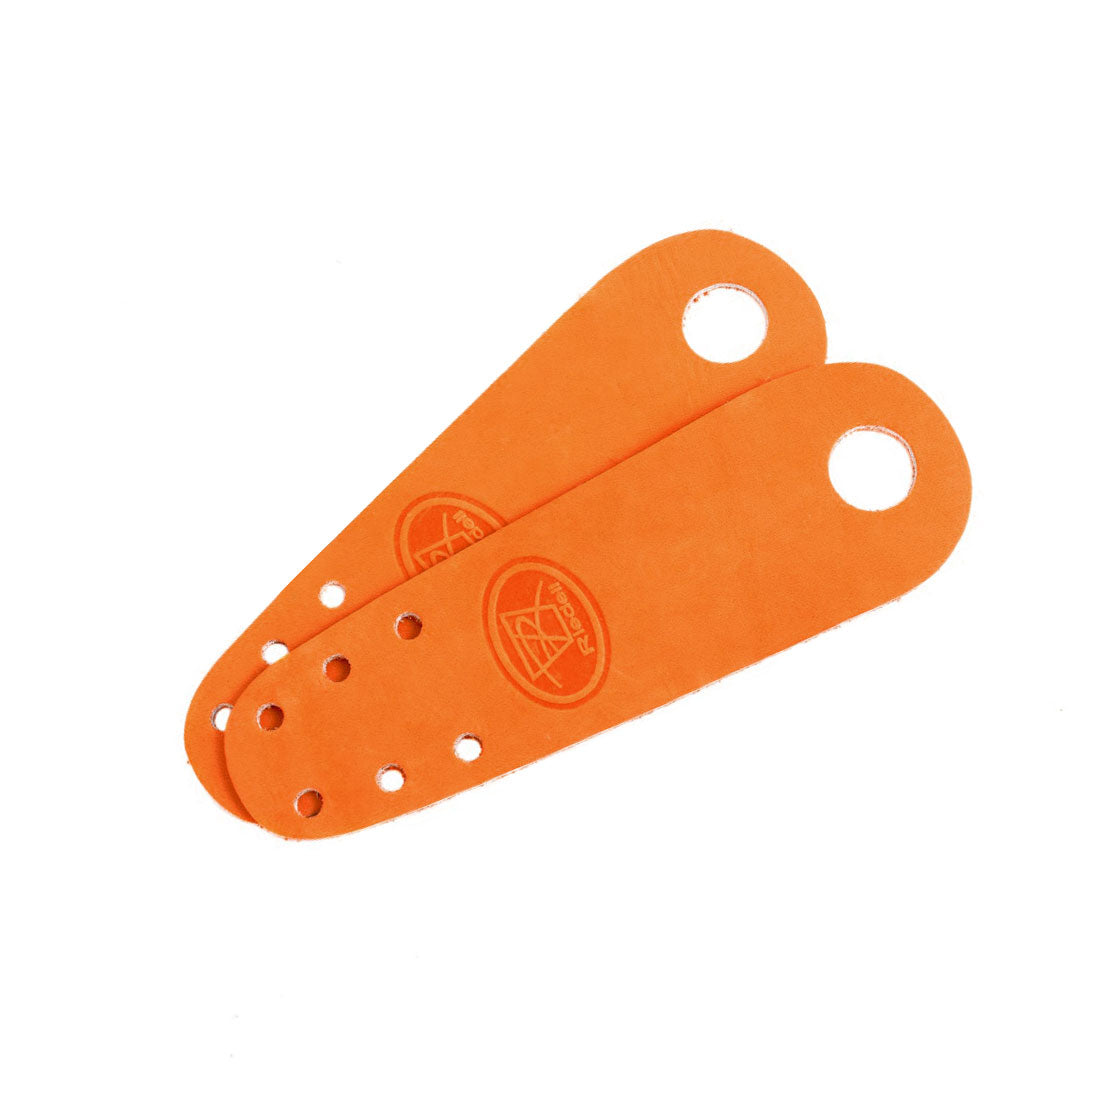 Riedell Flat Toe Guards 2pk - Leather Orange Roller Skate Hardware and Parts